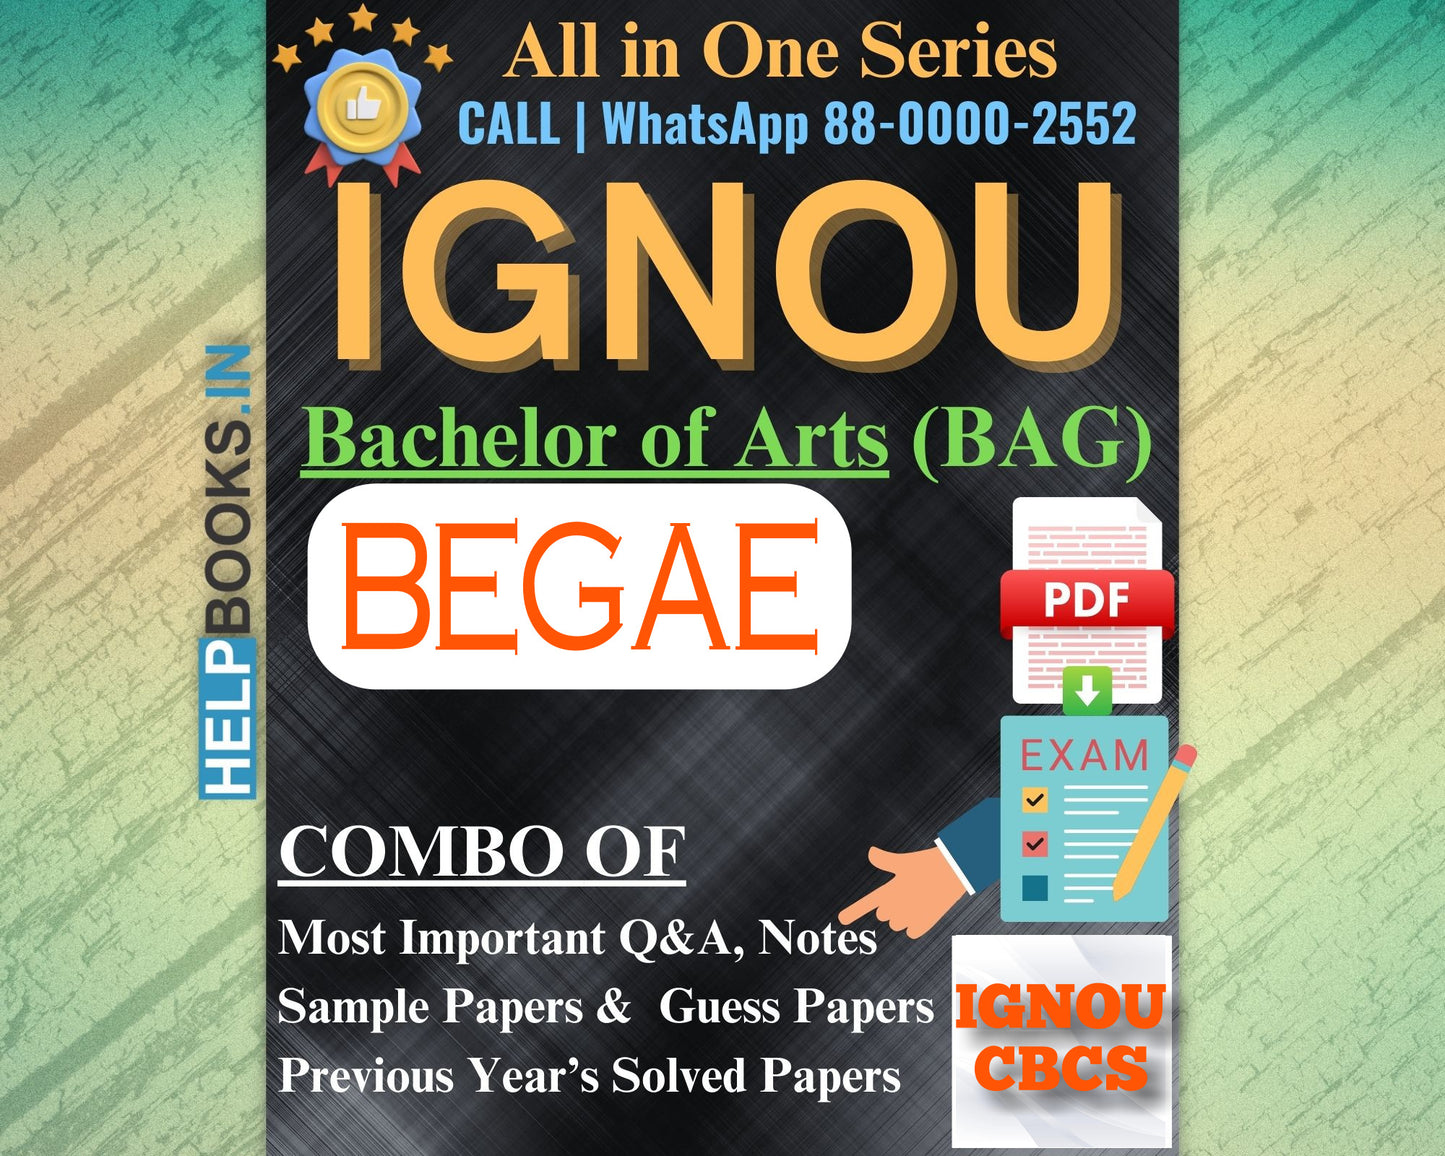 IGNOU BAG Online Study Package: Bachelor of Arts (BA) - Previous Year’s Solved Papers, Q&A, Exam Notes, Sample Papers, Guess Papers-BEGAE182